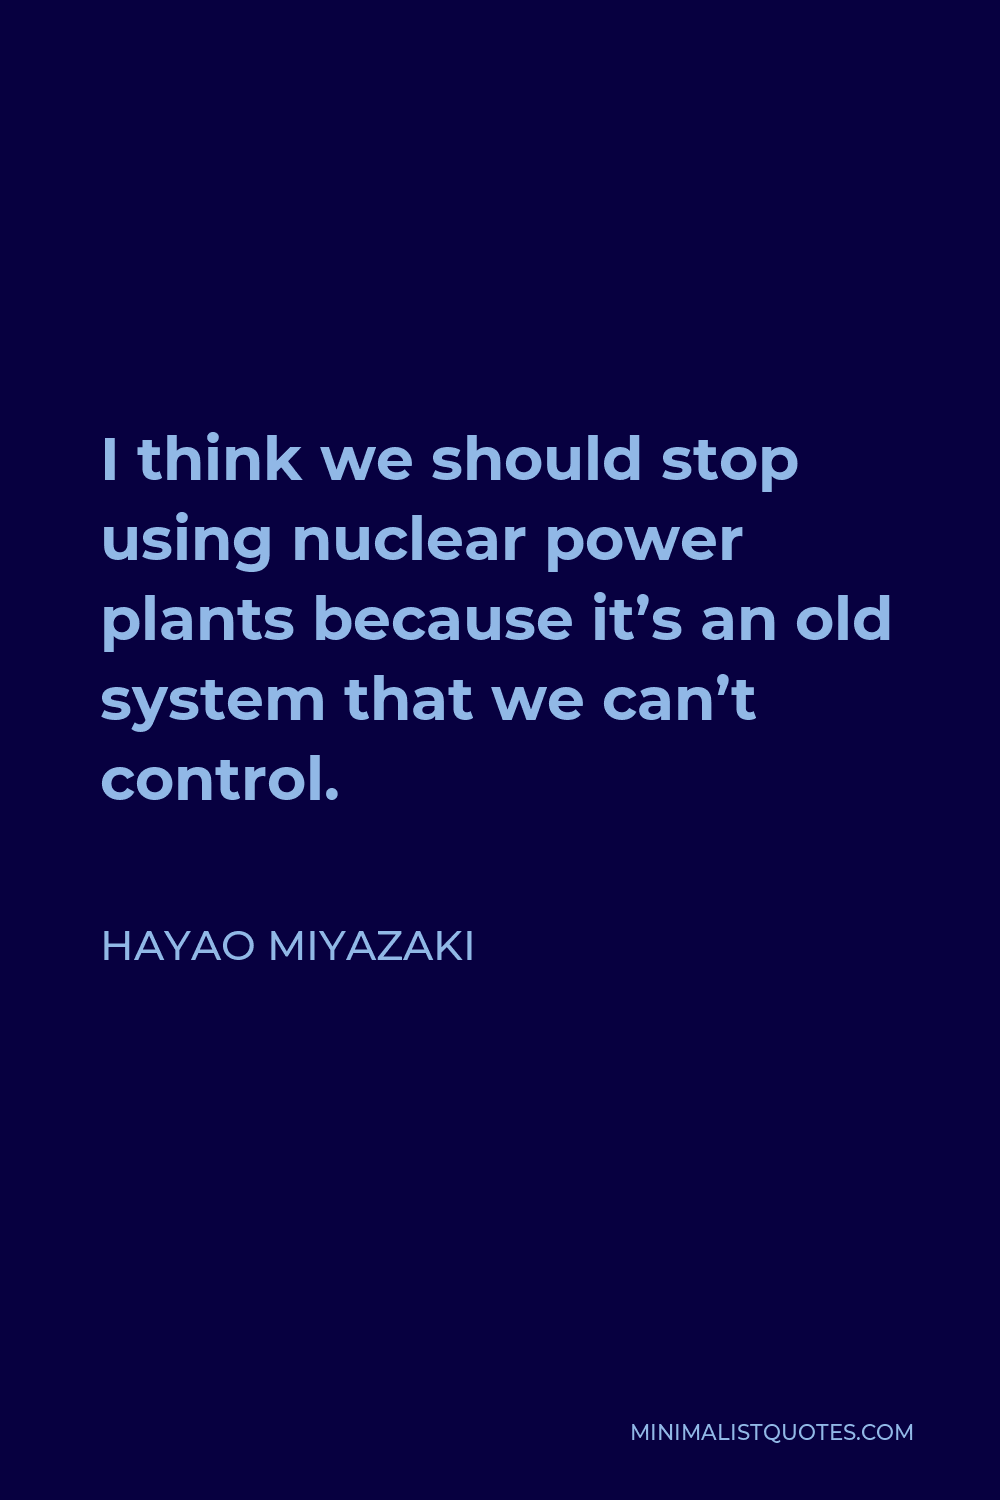 Hayao Miyazaki Quote - I think we should stop using nuclear power plants because it’s an old system that we can’t control.